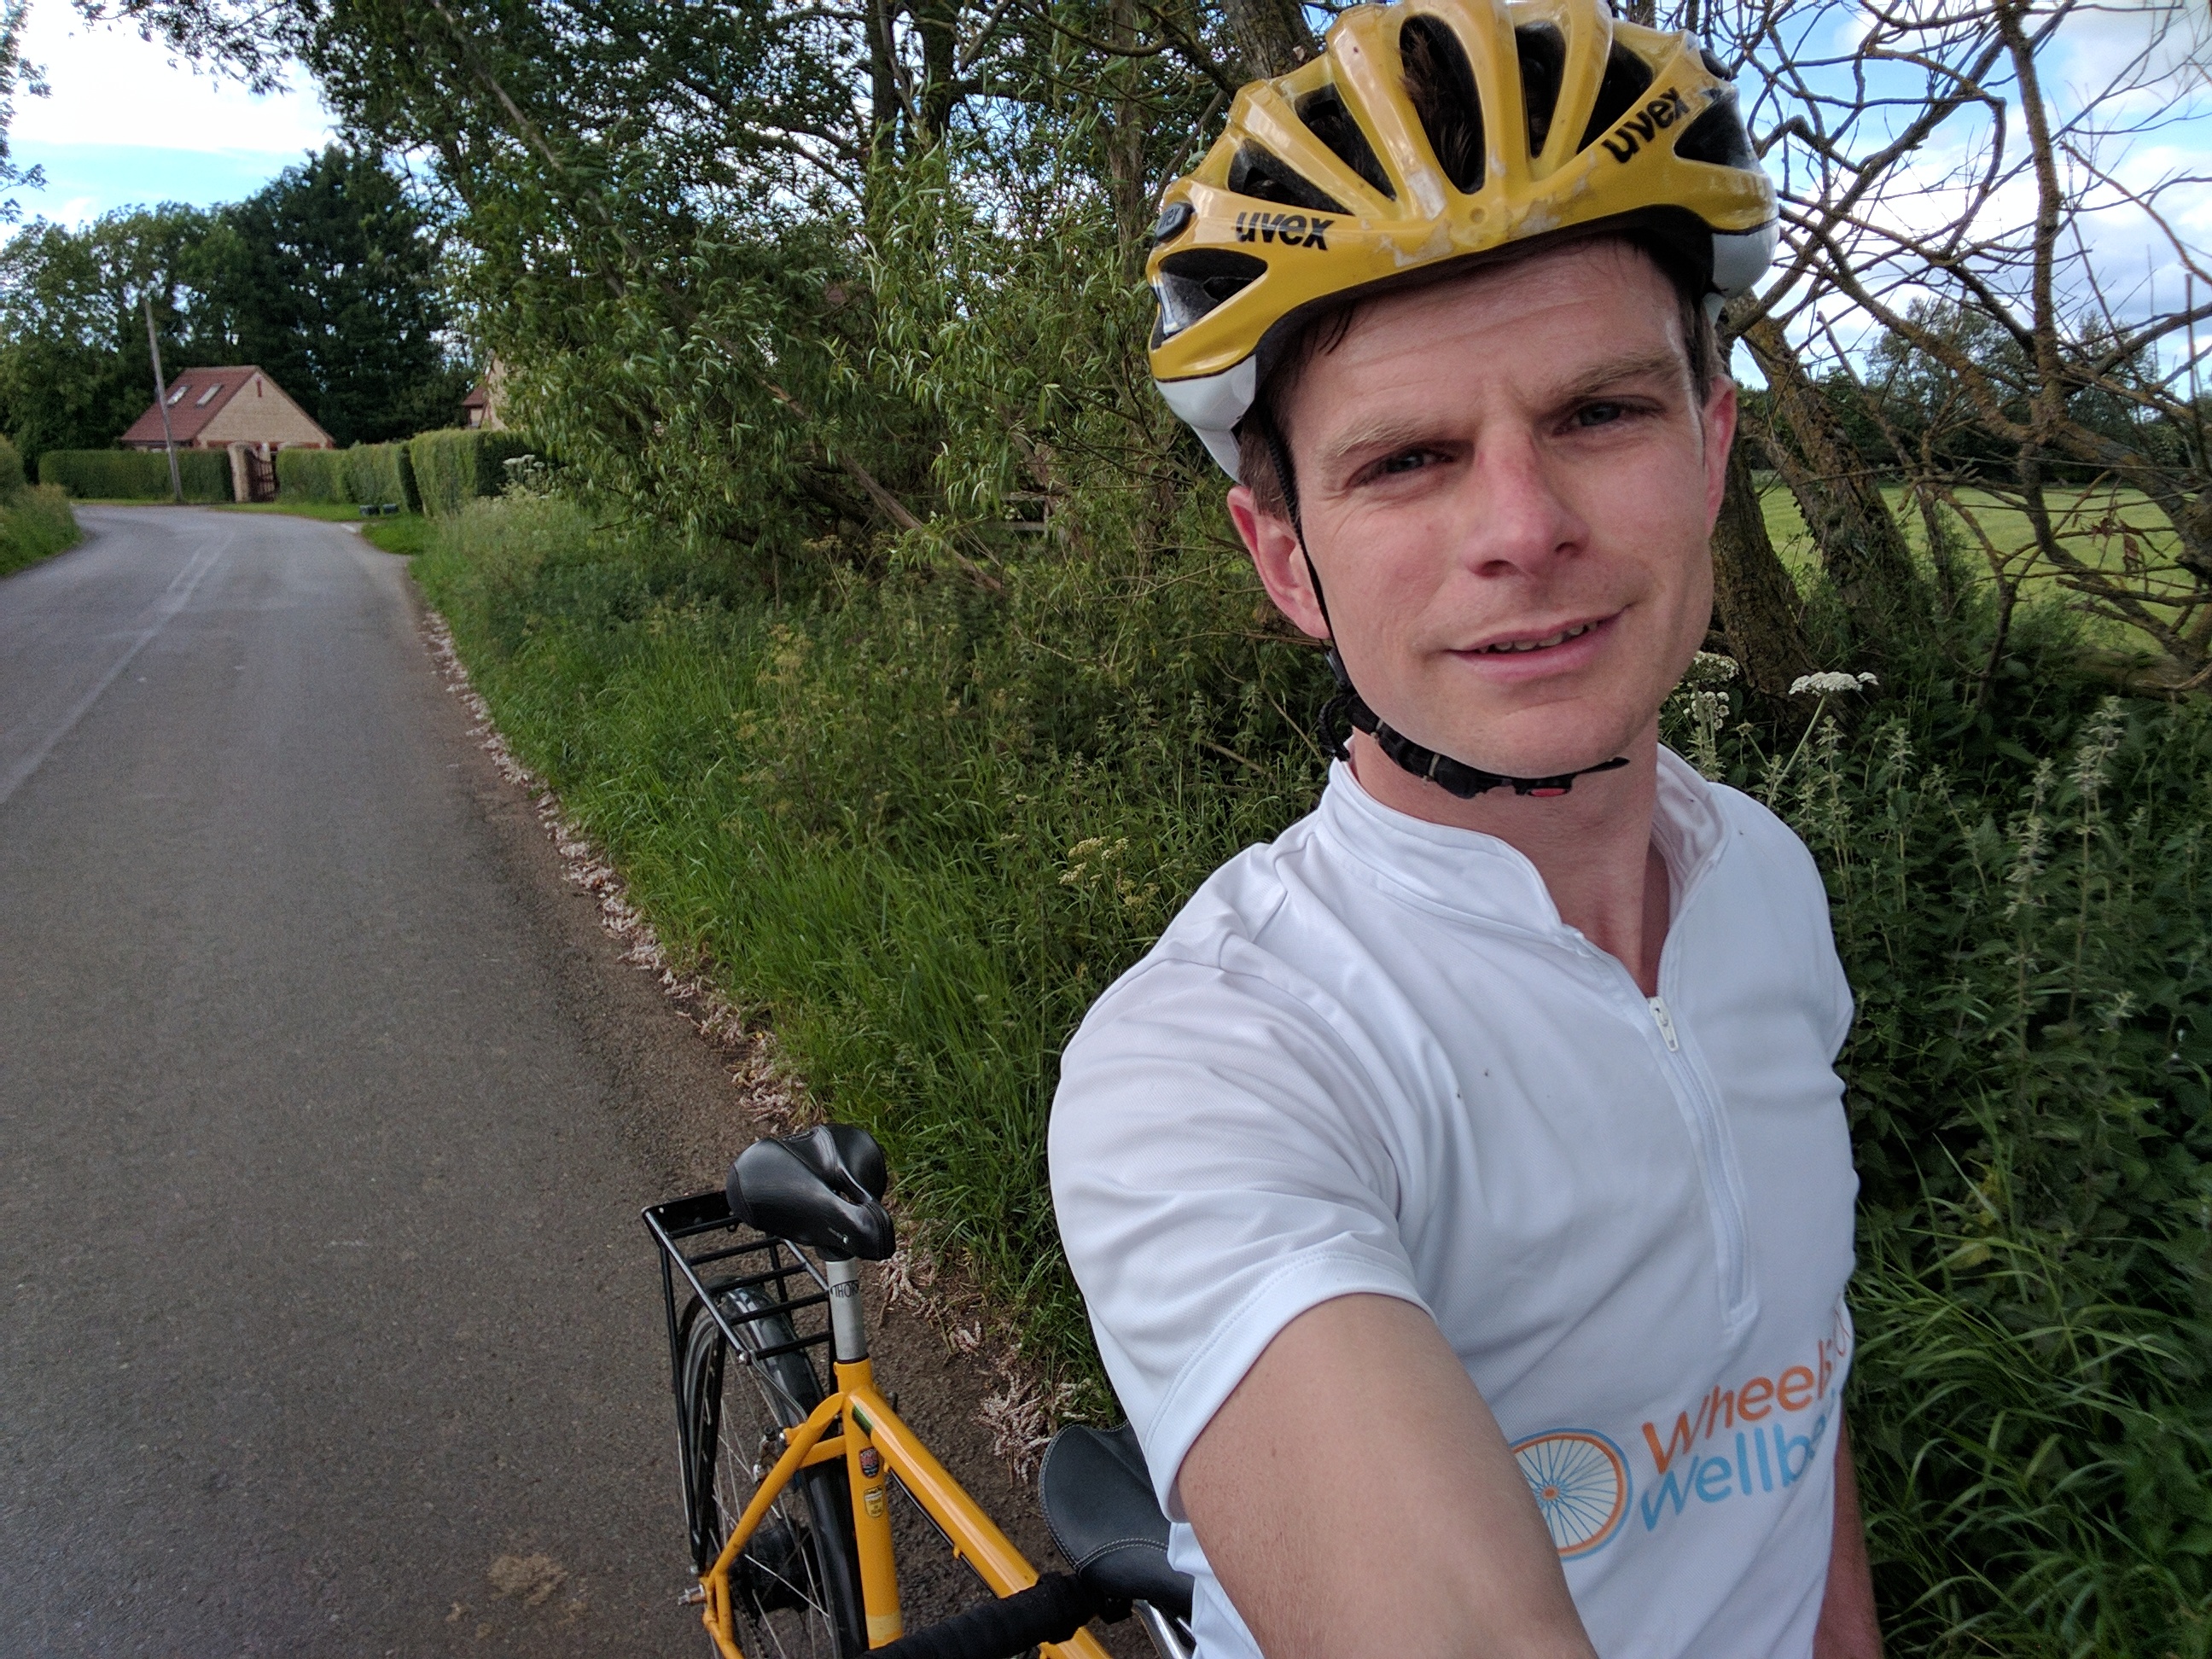 James in a white jersey with tandem in a country lane, rear seat is unoccupied.